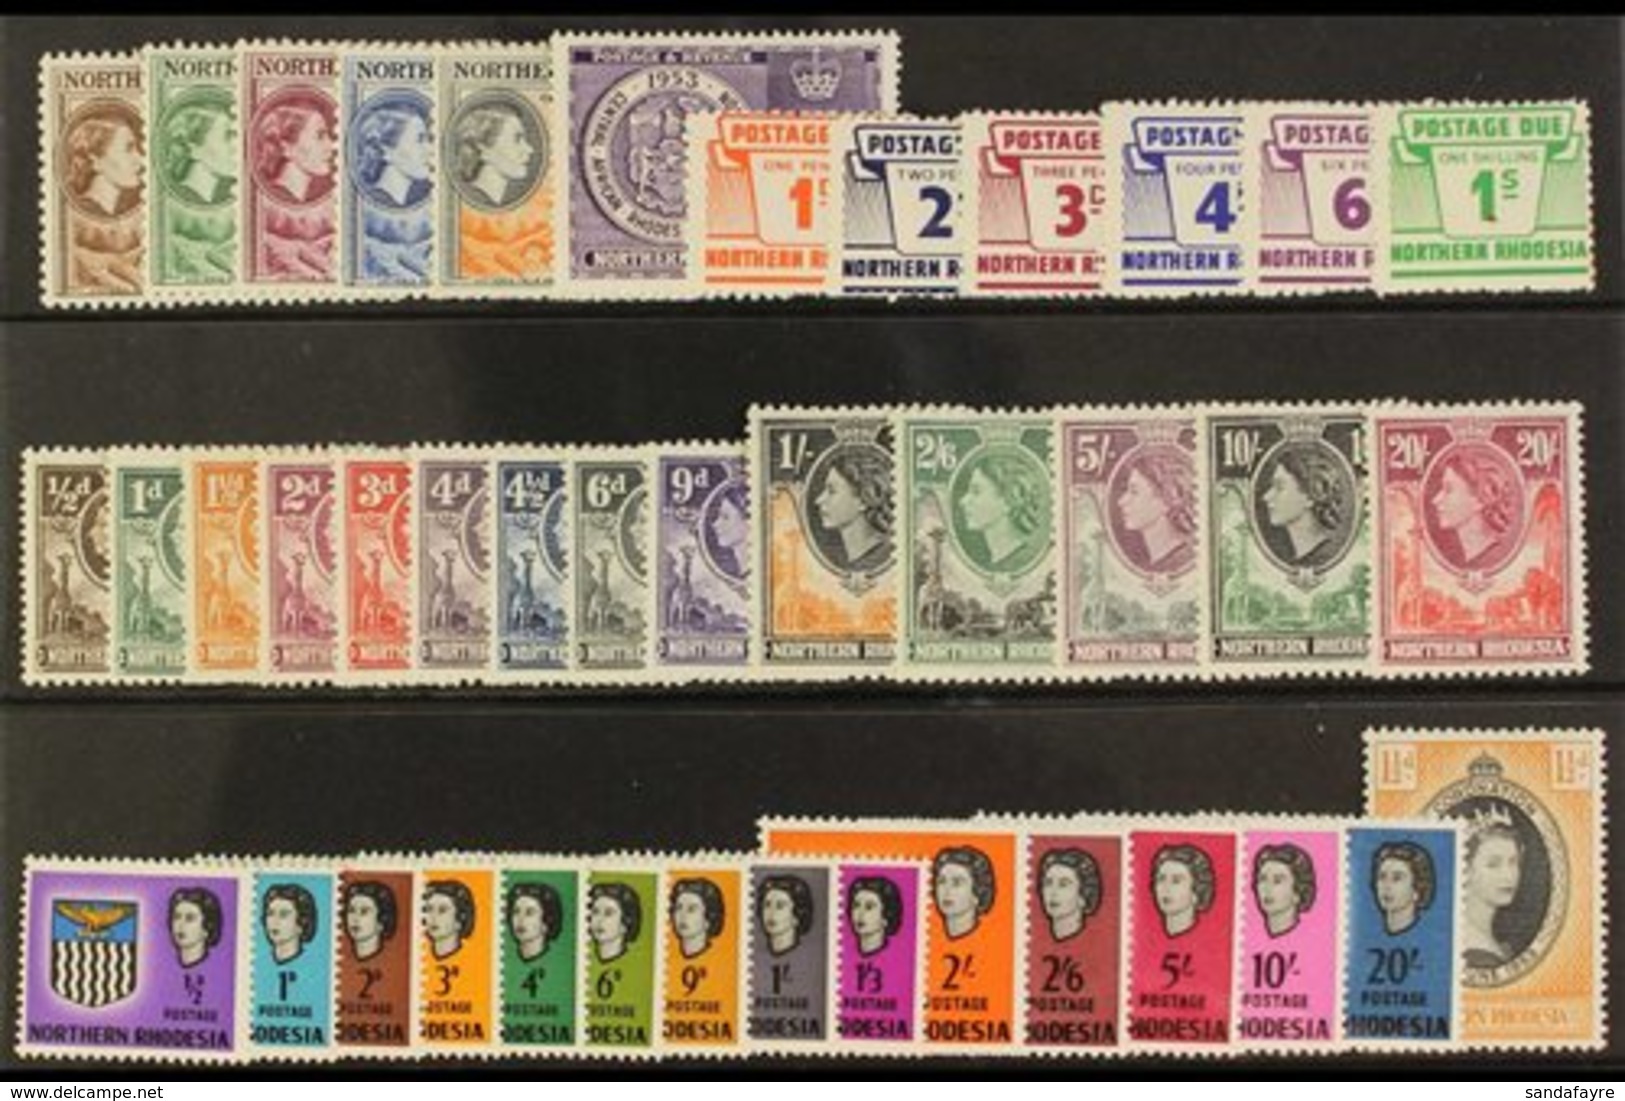 1953-63 COMPLETE MINT COLLECTION. A Complete QEII Mint Collection From The 1953 Rhodes Set To The 1963 Definitive Set, S - Nordrhodesien (...-1963)